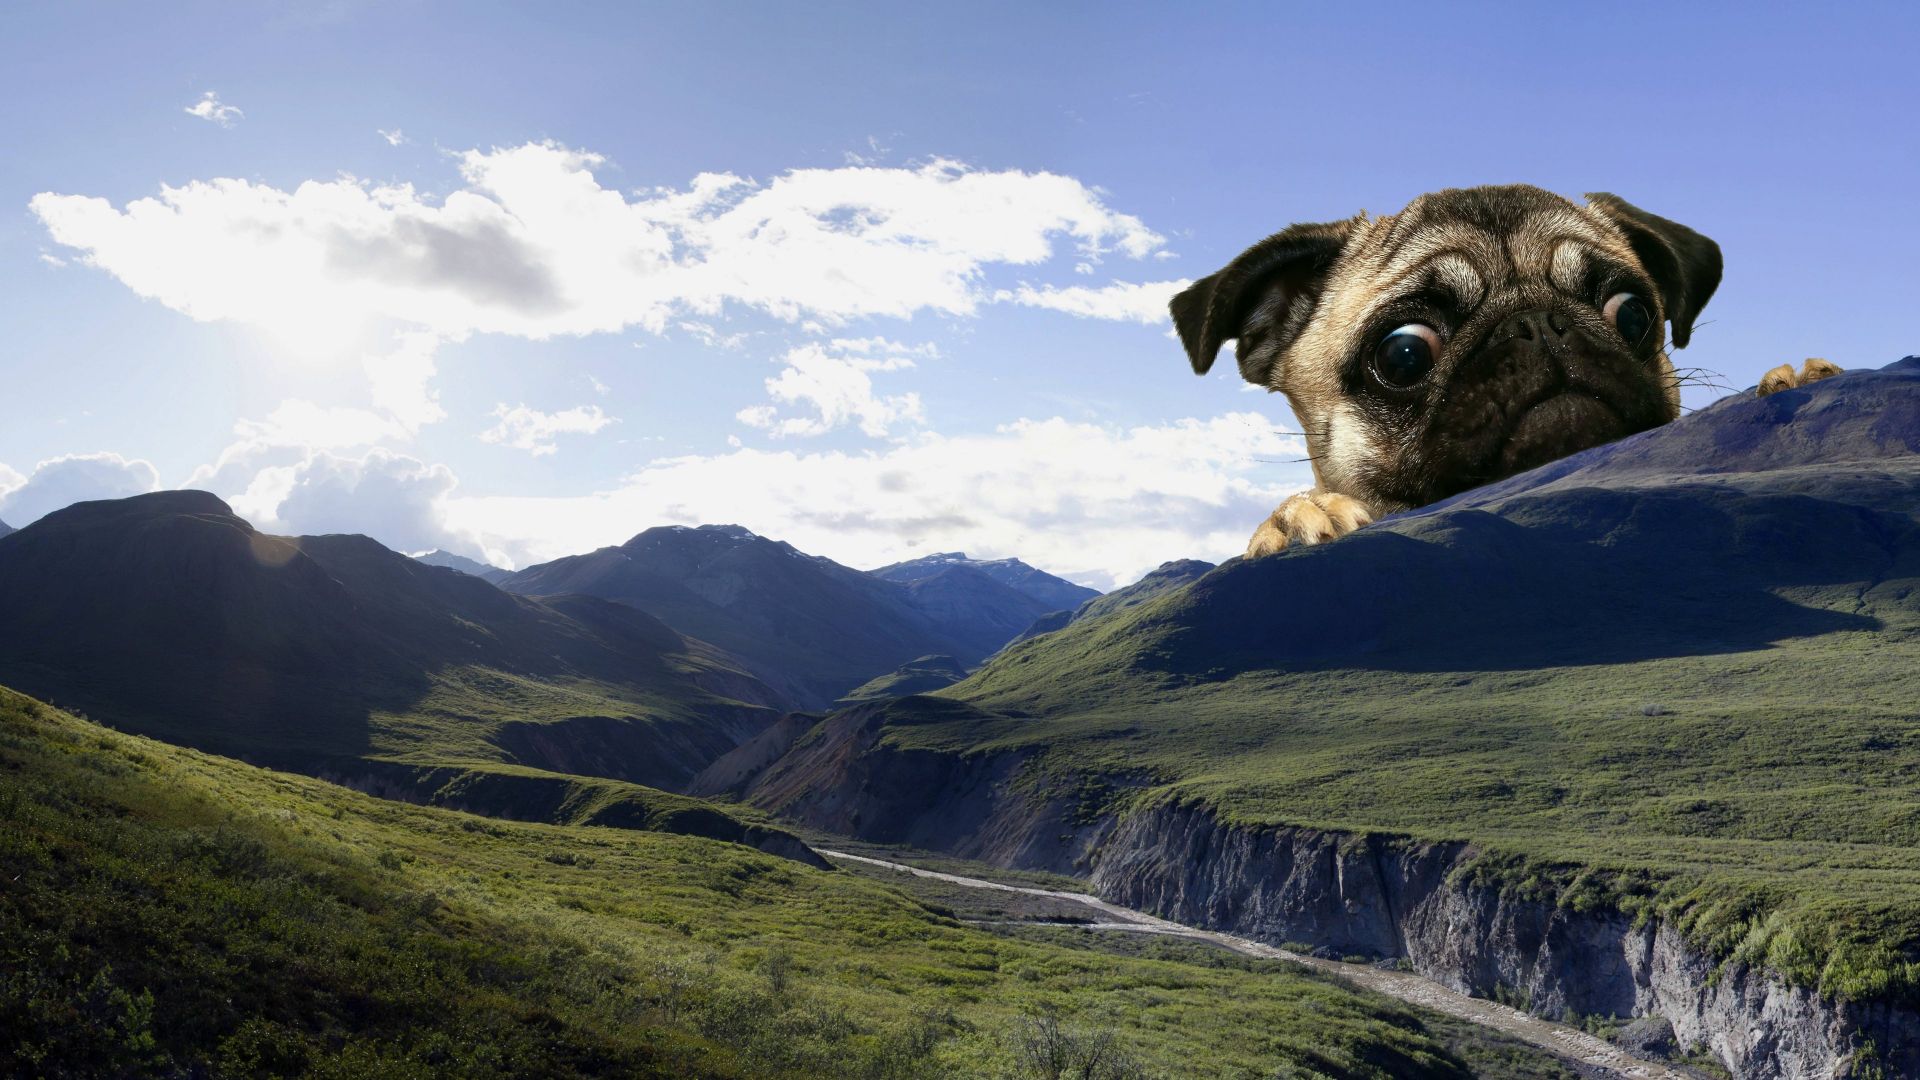 Giant Pug wallpaper in 1920x1080 resolution